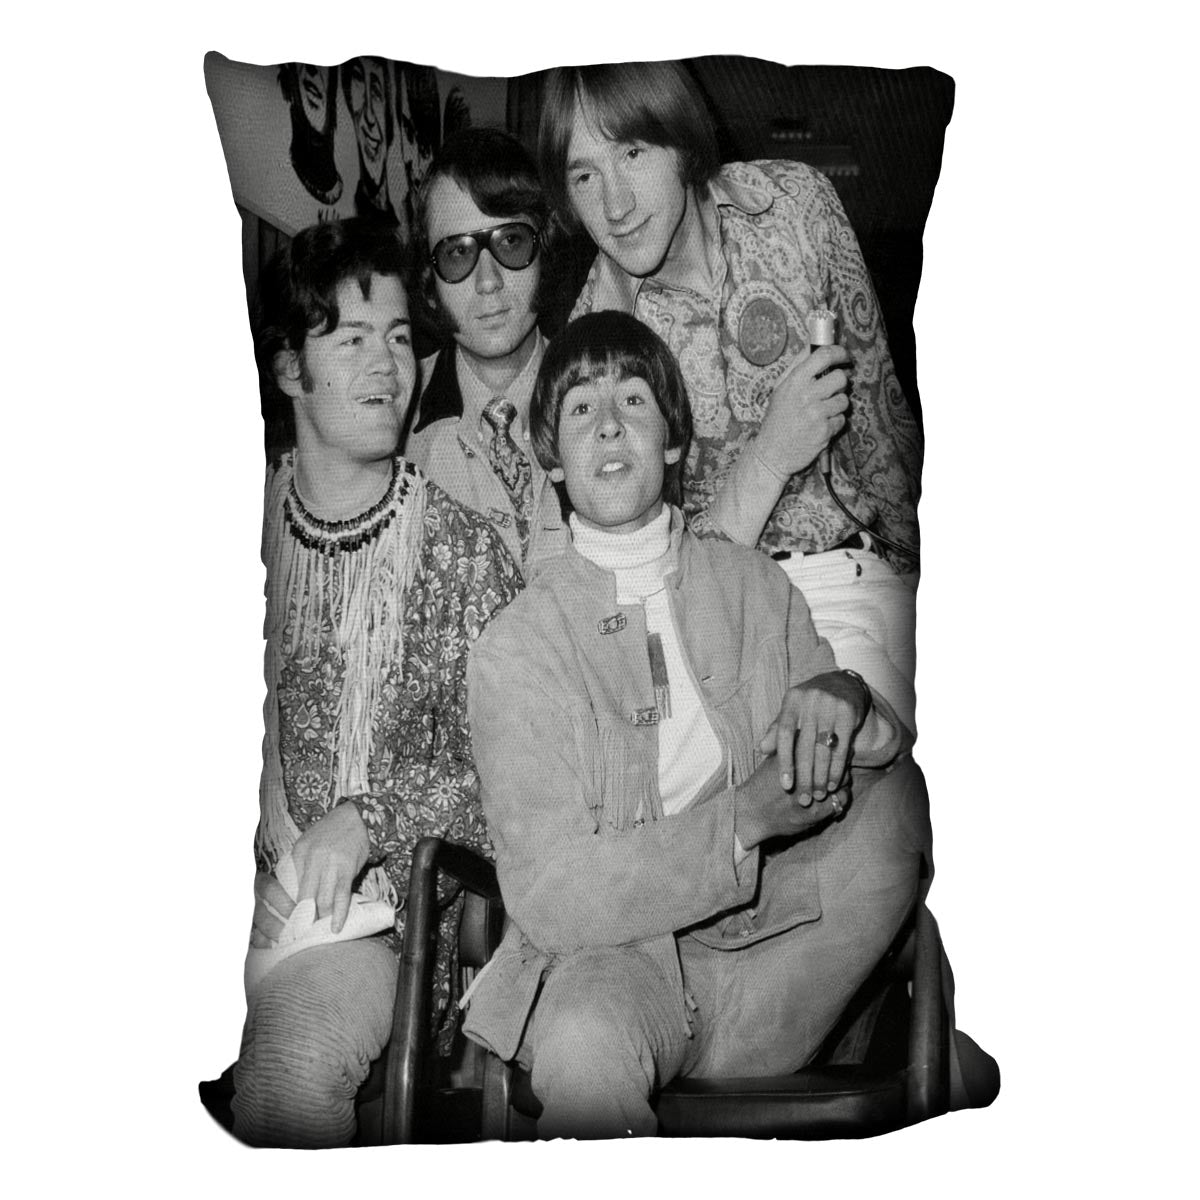 The Monkees sitting Cushion